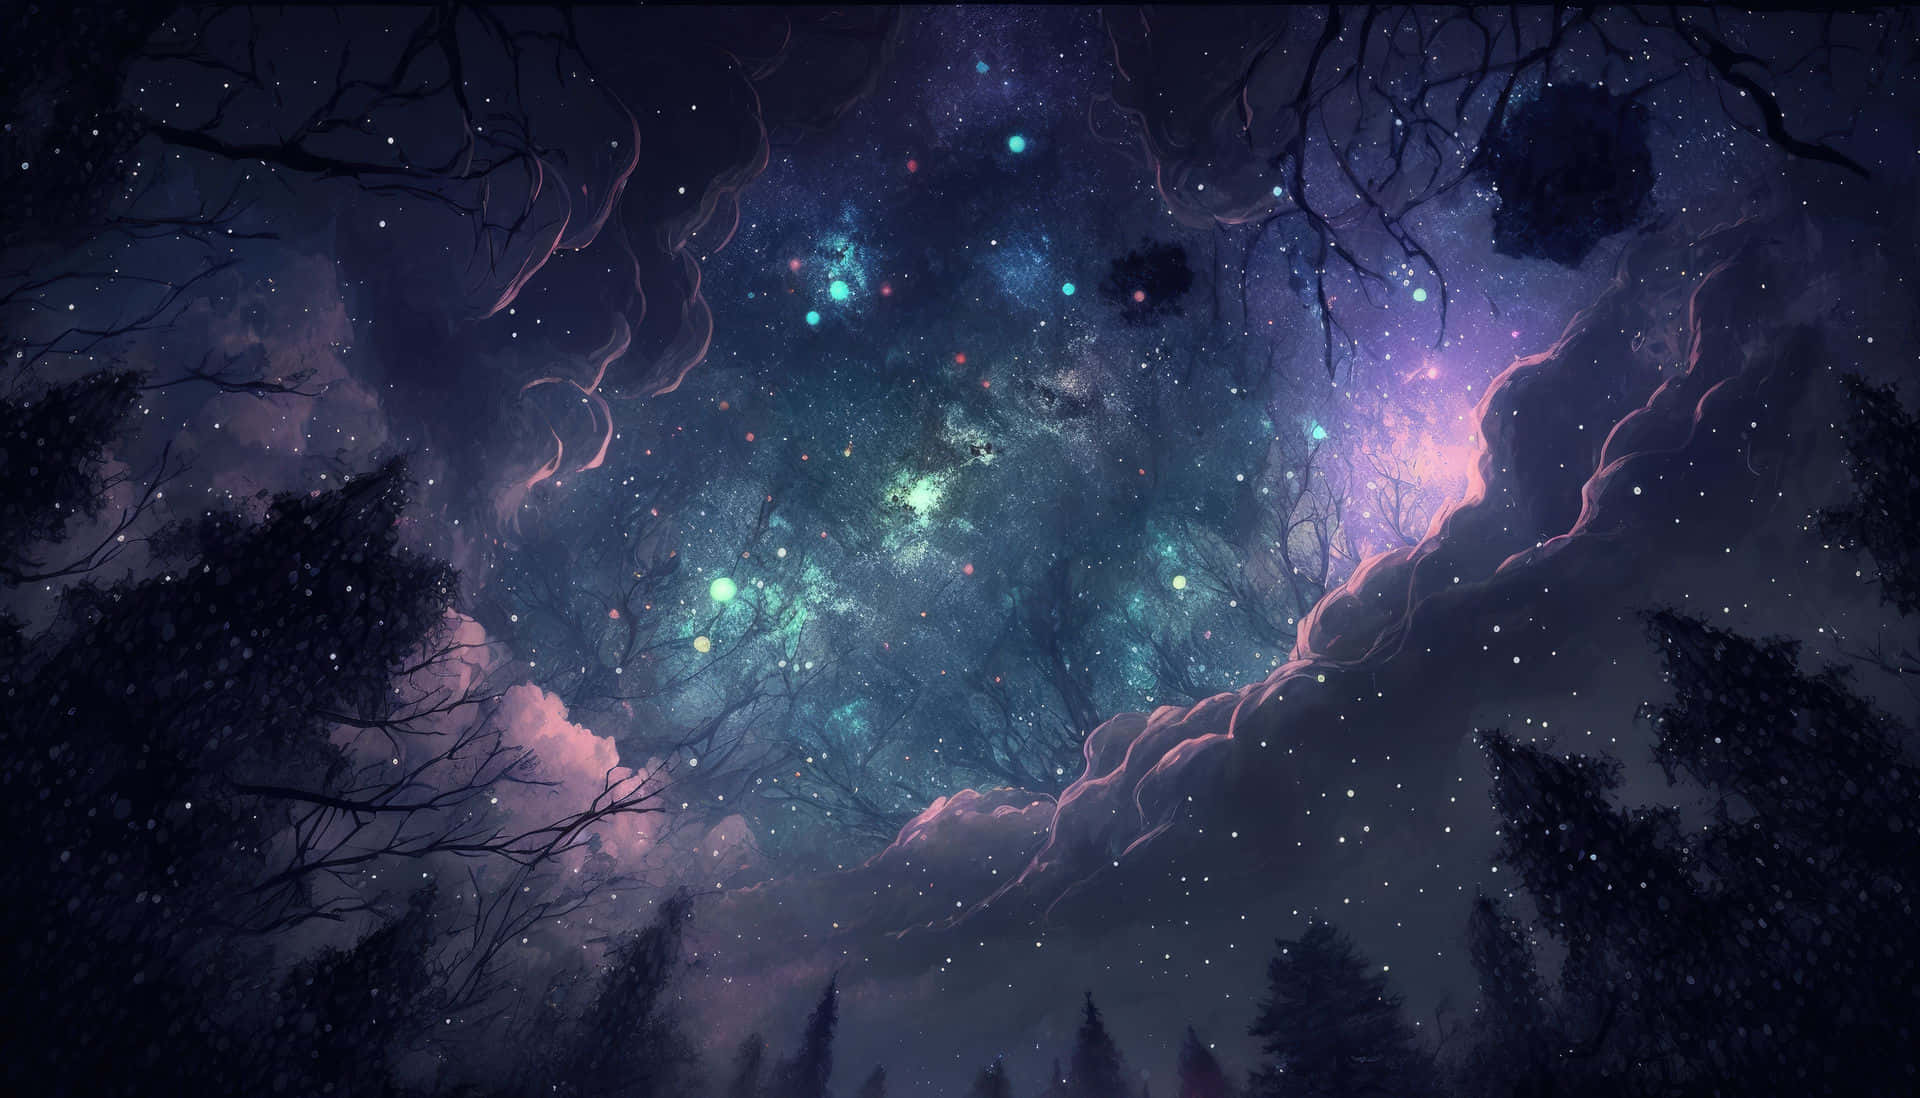 Marvel At The Beauty of Our Starry Sky